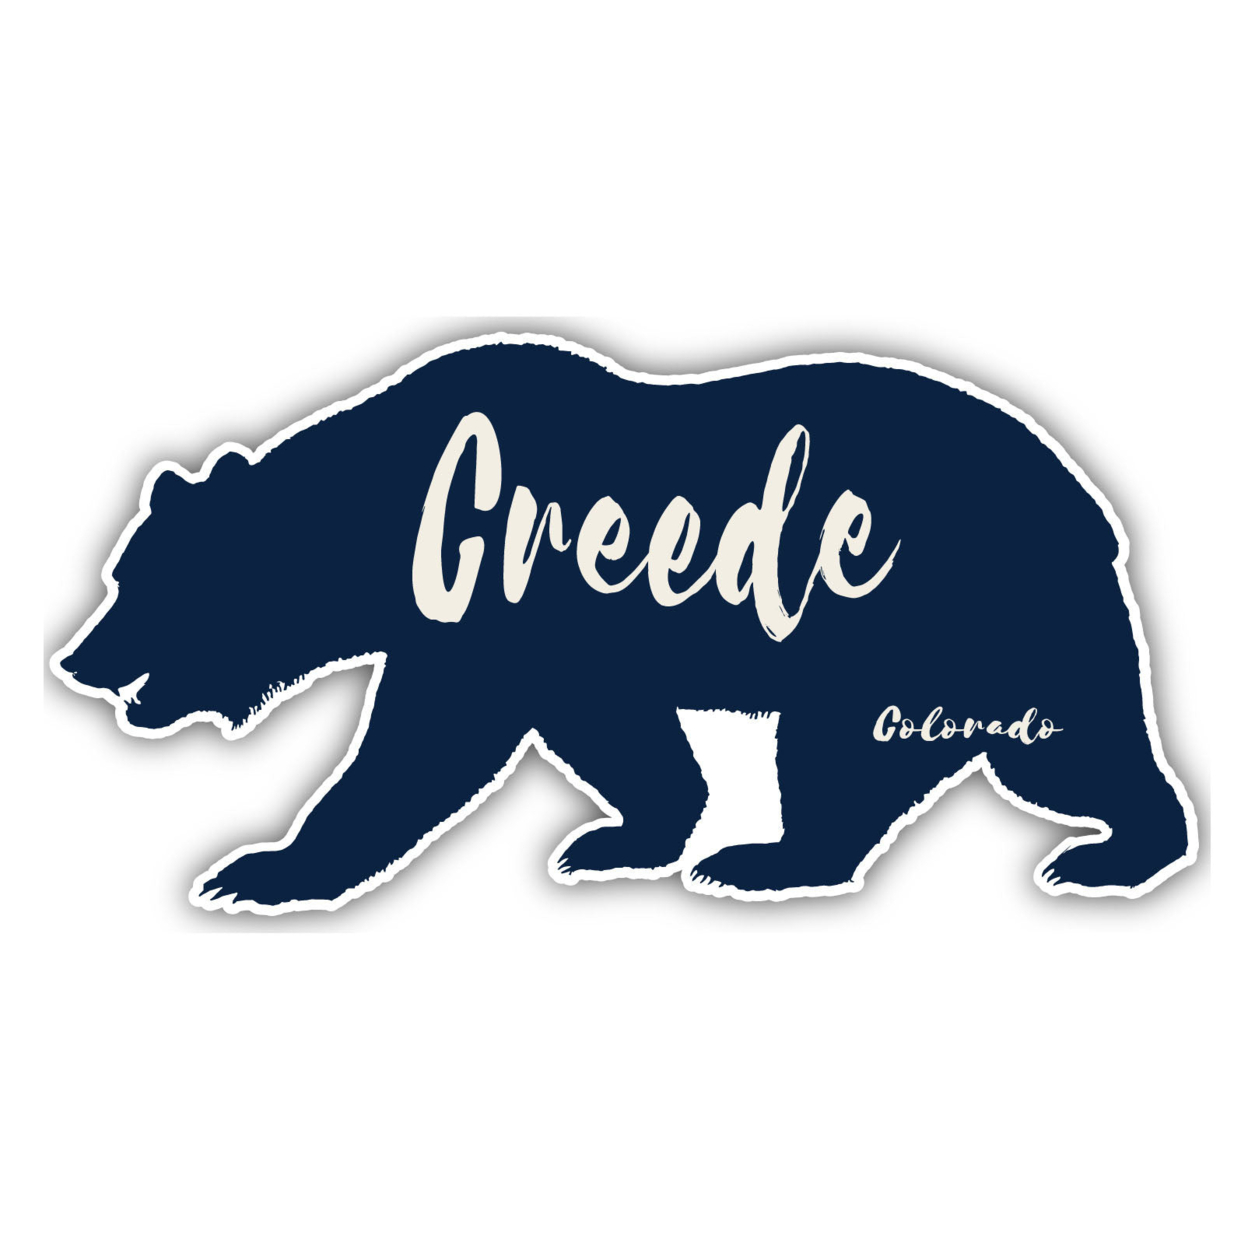 Creede Colorado Souvenir Decorative Stickers (Choose Theme And Size) - 4-Pack, 2-Inch, Bear